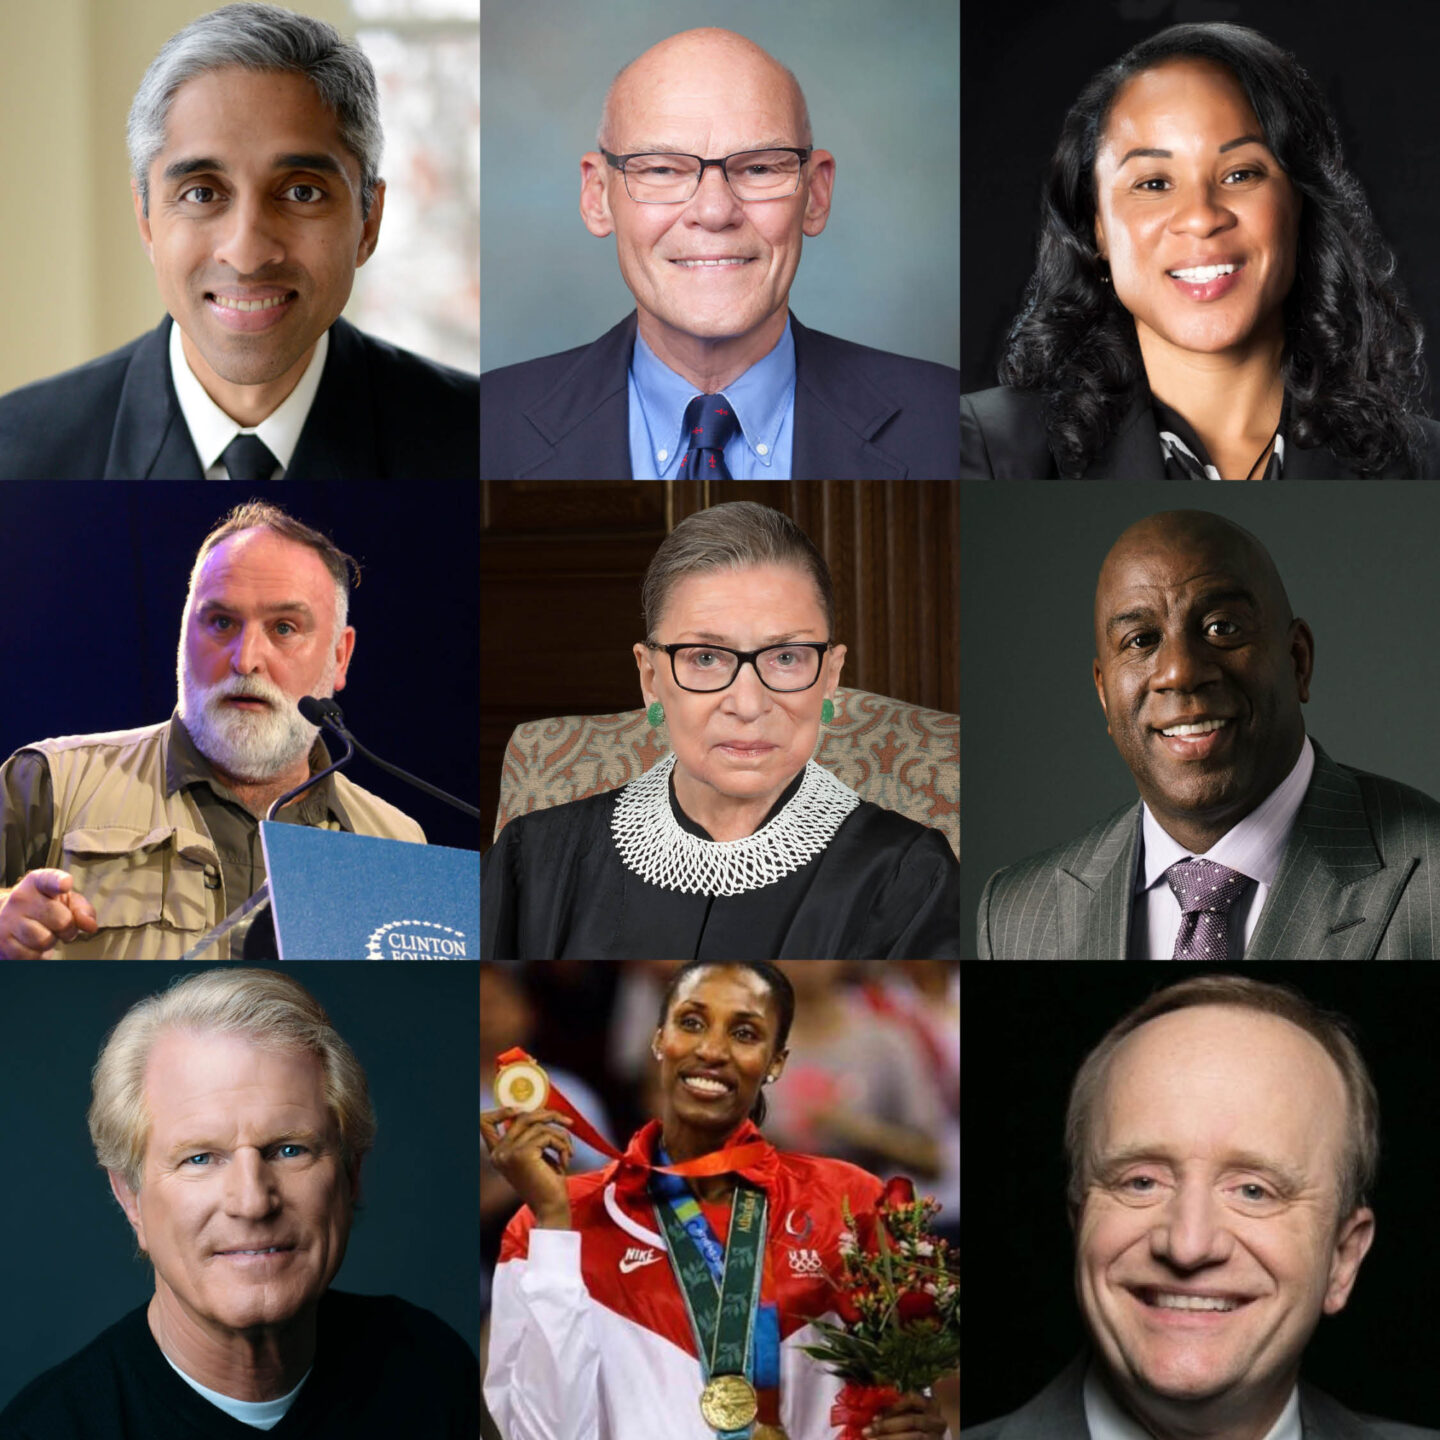 Composite of headshots including Vivek Murthy, James Carville, Dawn Staley, Dawn Staley, José Andrés, Ruth Bader Ginsburg, Magic Johnson, Roy Spence, Lisa Leslie, and Paul Begala